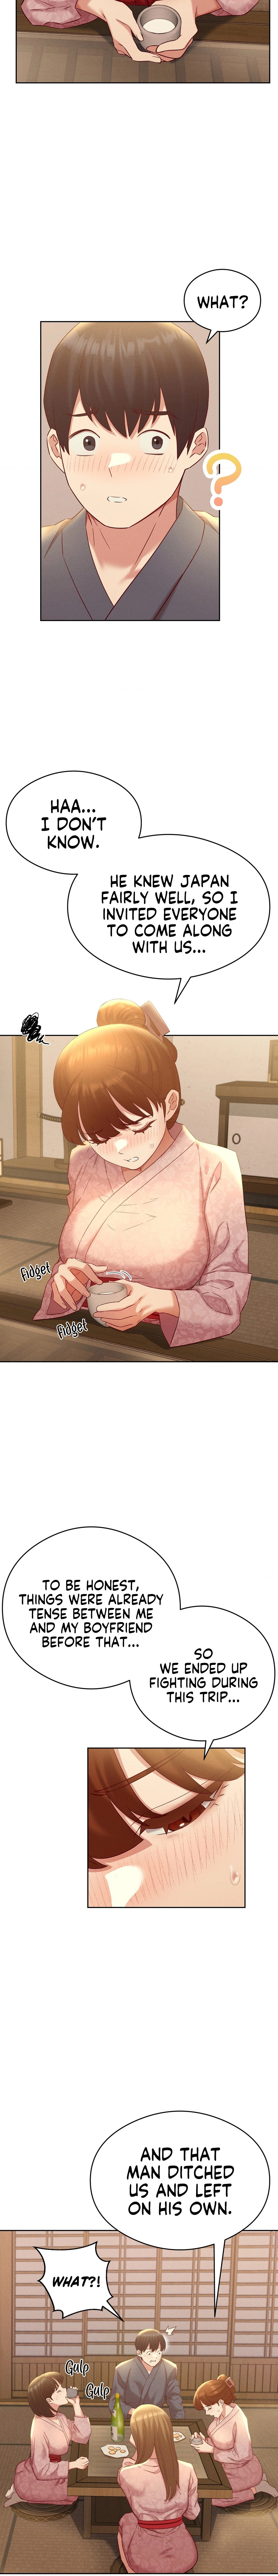 Shall We Go To The Ryokan Together? - Chapter 2 Page 12